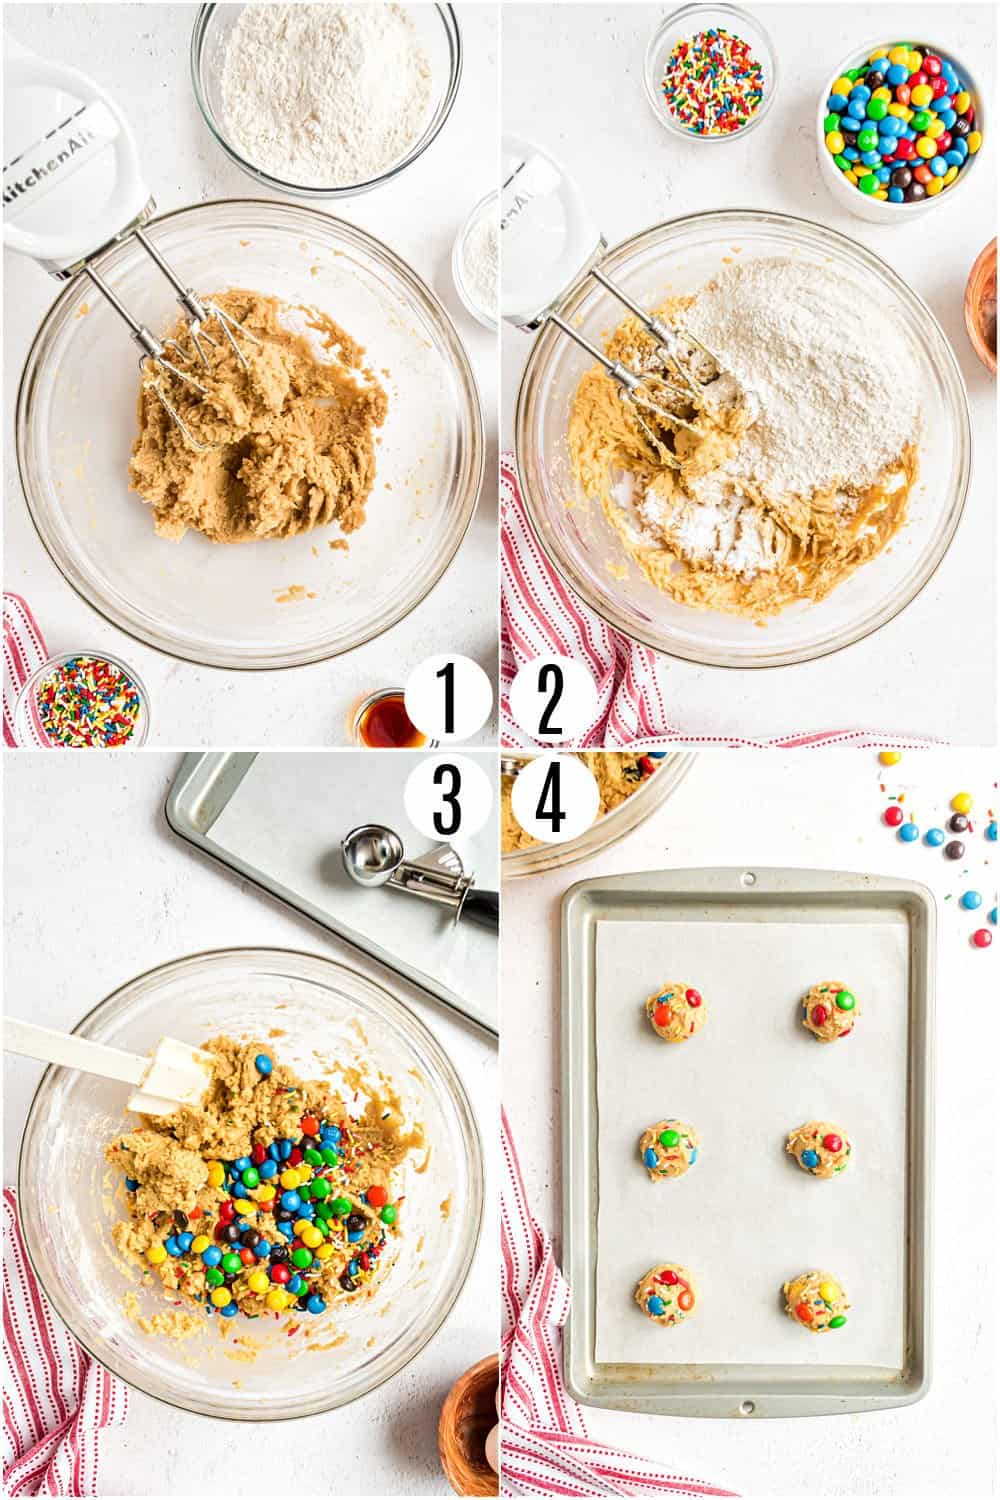 Step by step photos showing how to make M&M cookies.